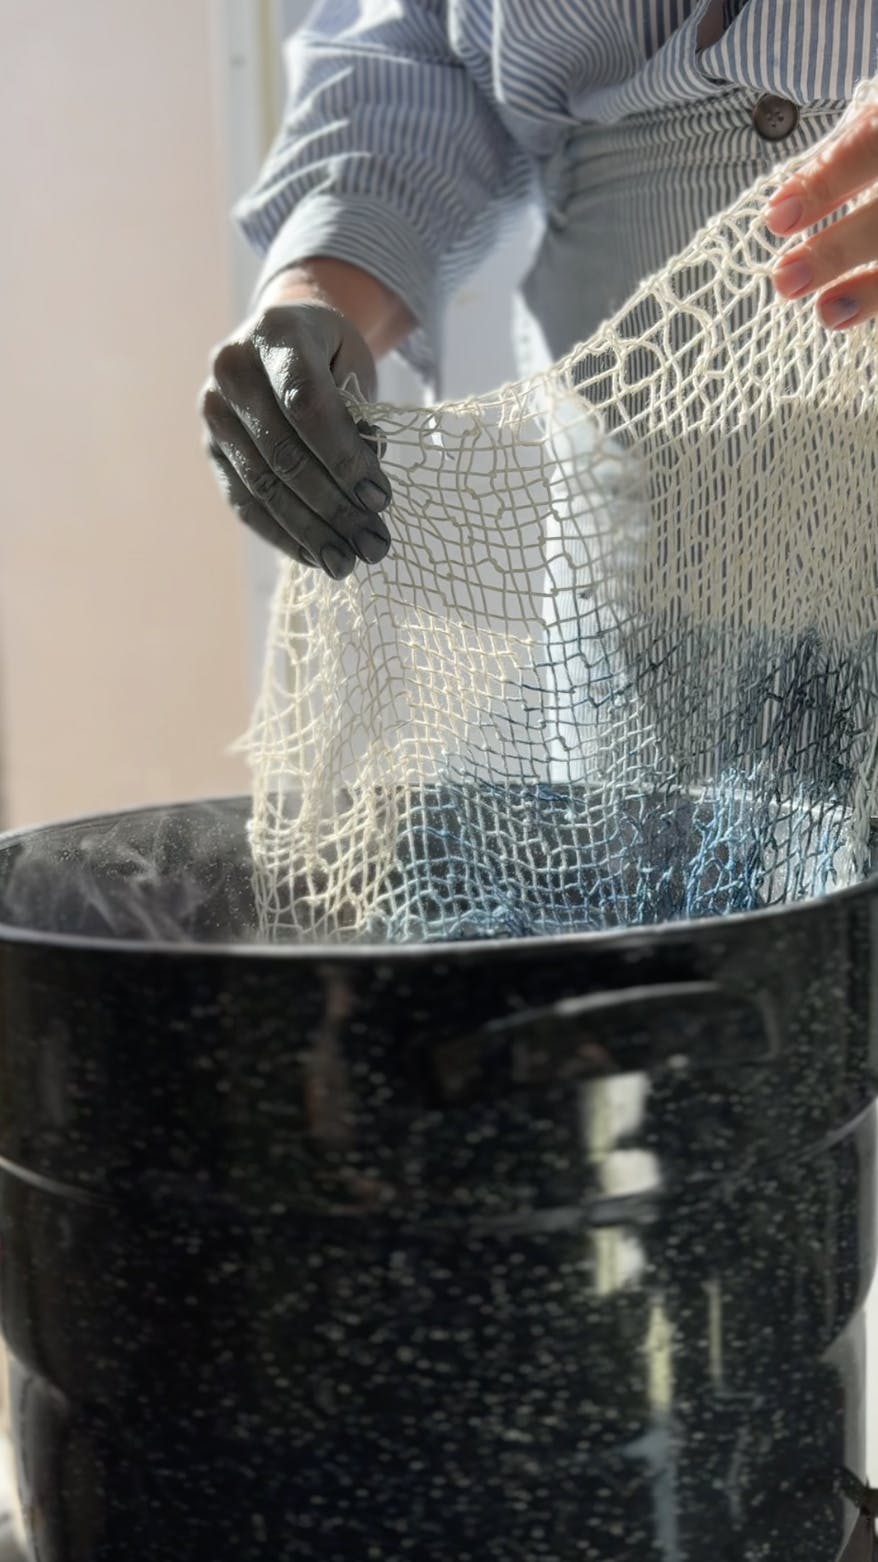 Artist Carrie Crawford naturally dyeing woven fabric in a large bucket.